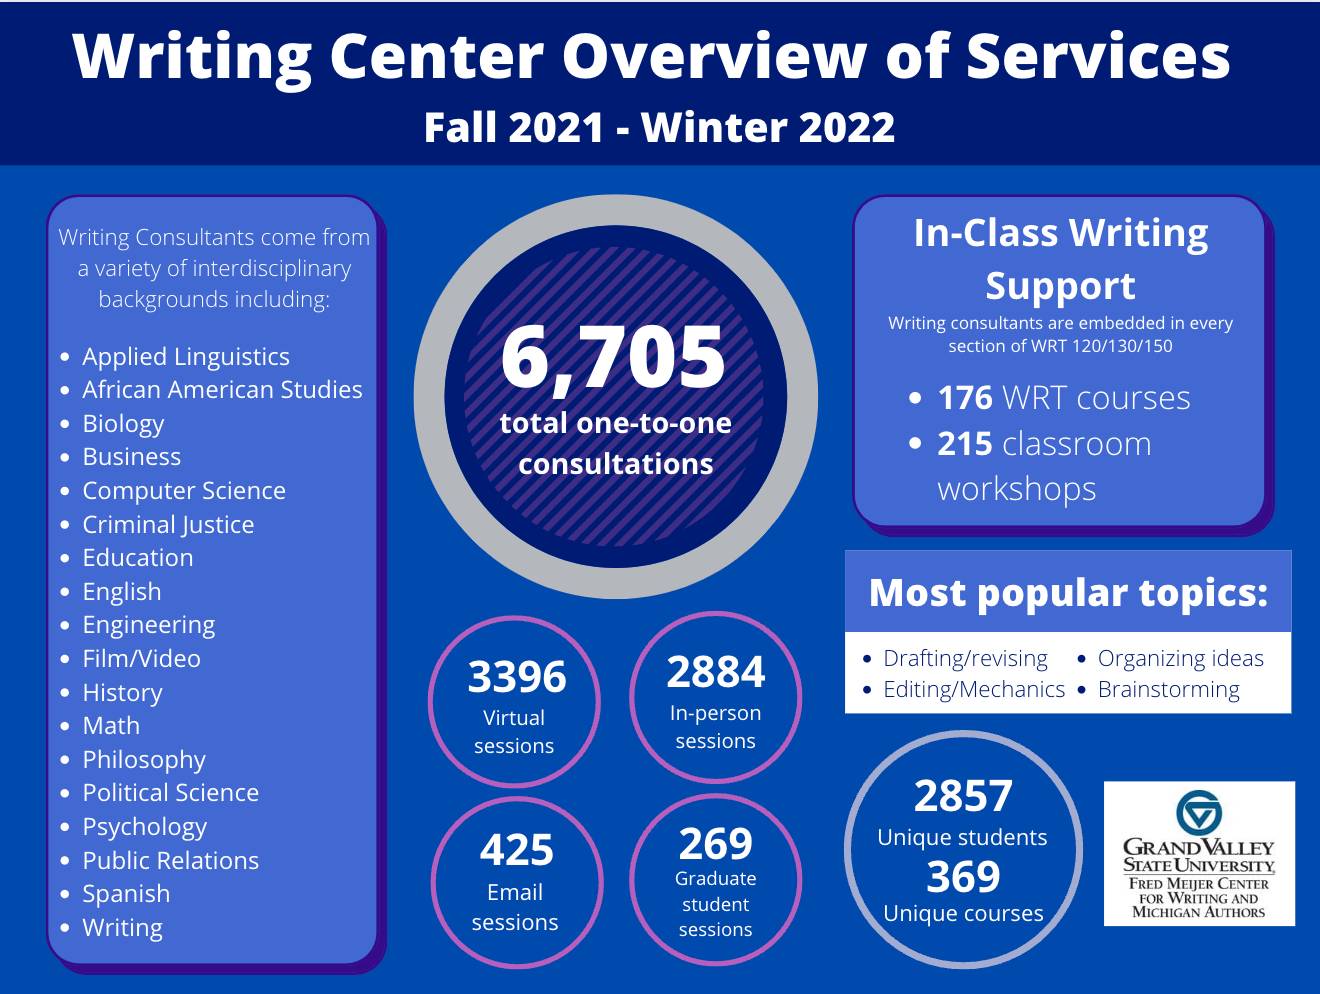 Fall 2021-Winter 2022 Overview of services